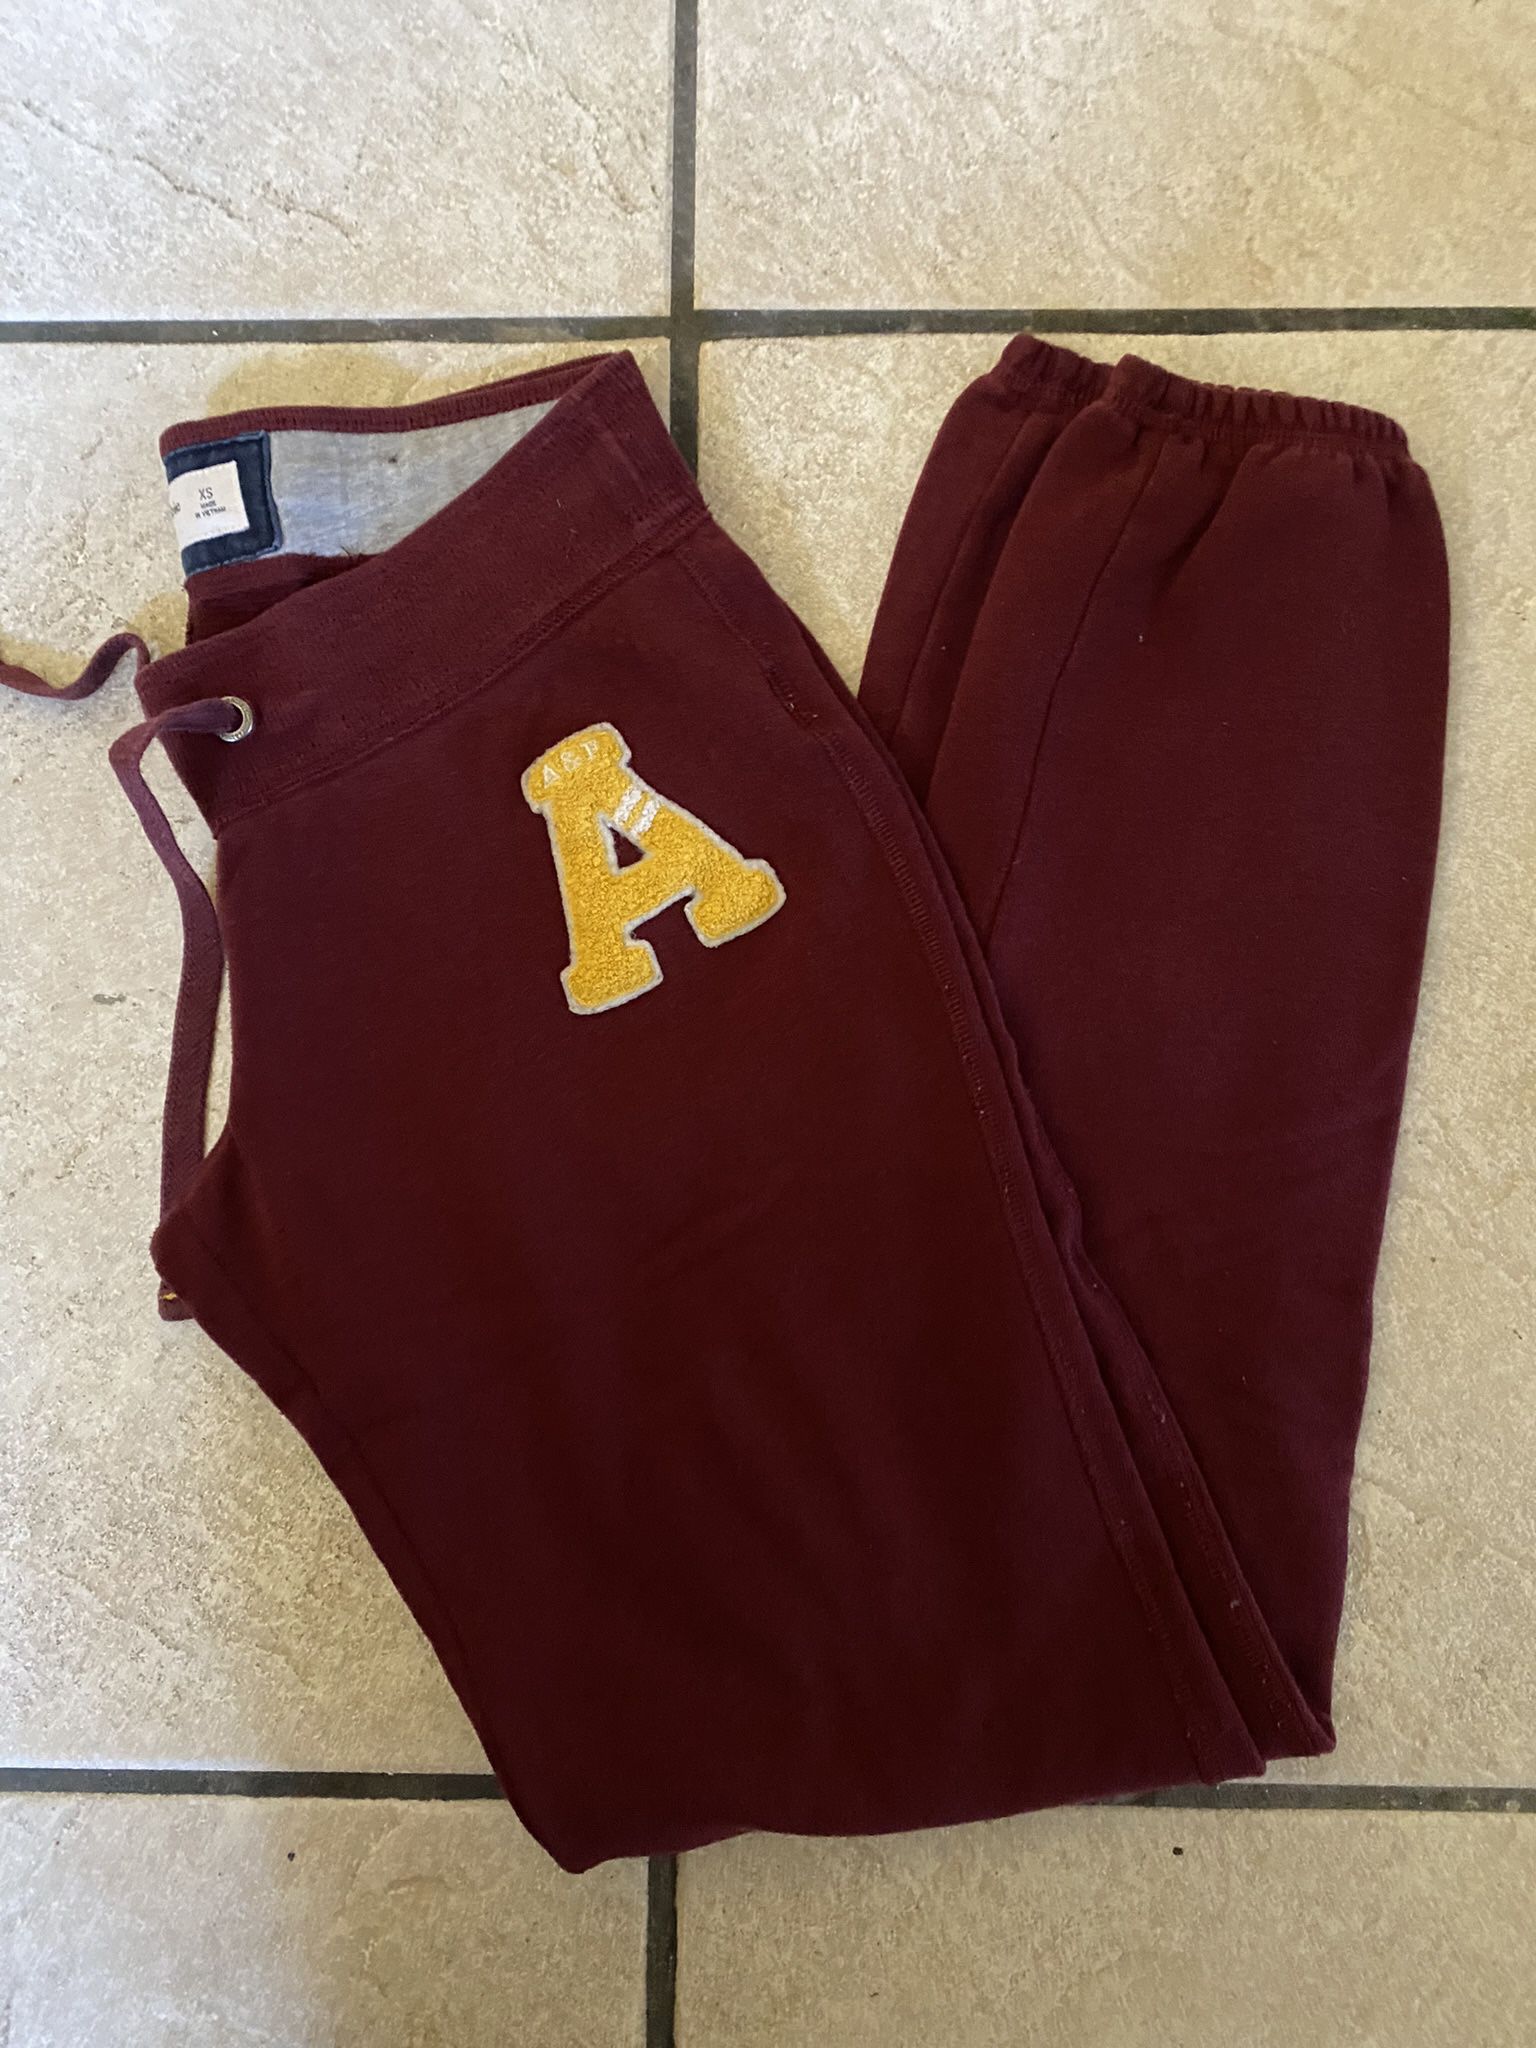 Abercrombie & Fitch Burgundy & Yellow Sweatpants